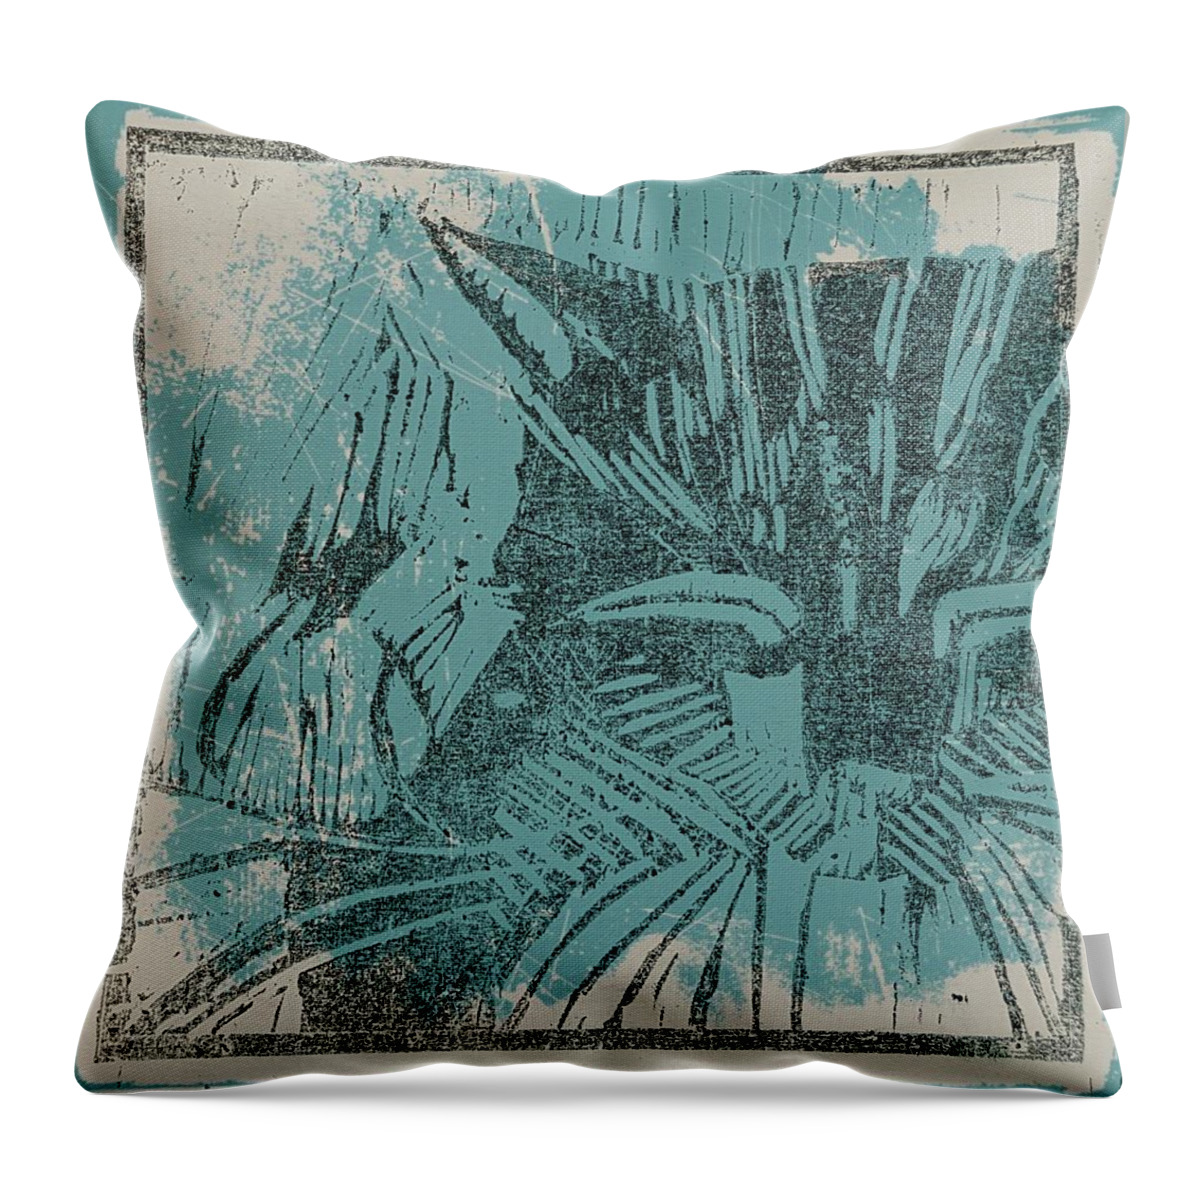 Cat Greeting Card Throw Pillow featuring the mixed media Cat - Blue by Paul Lovering